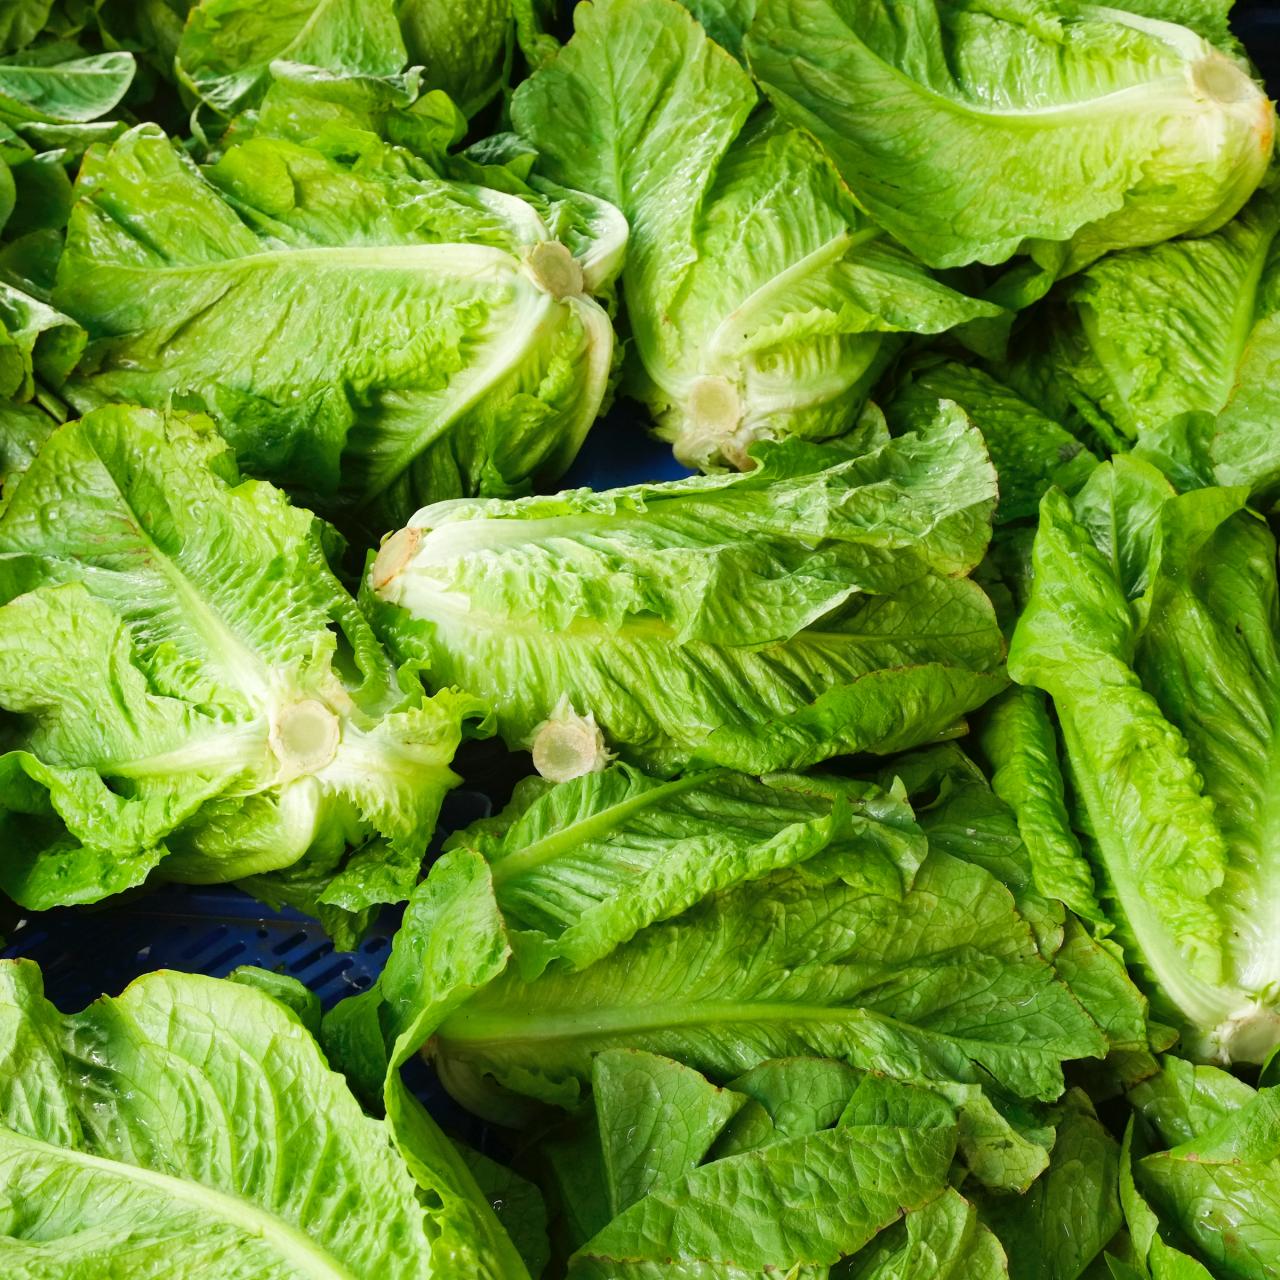 How to Store Lettuce in the Fridge (Without Plastic) - Clean Green Simple